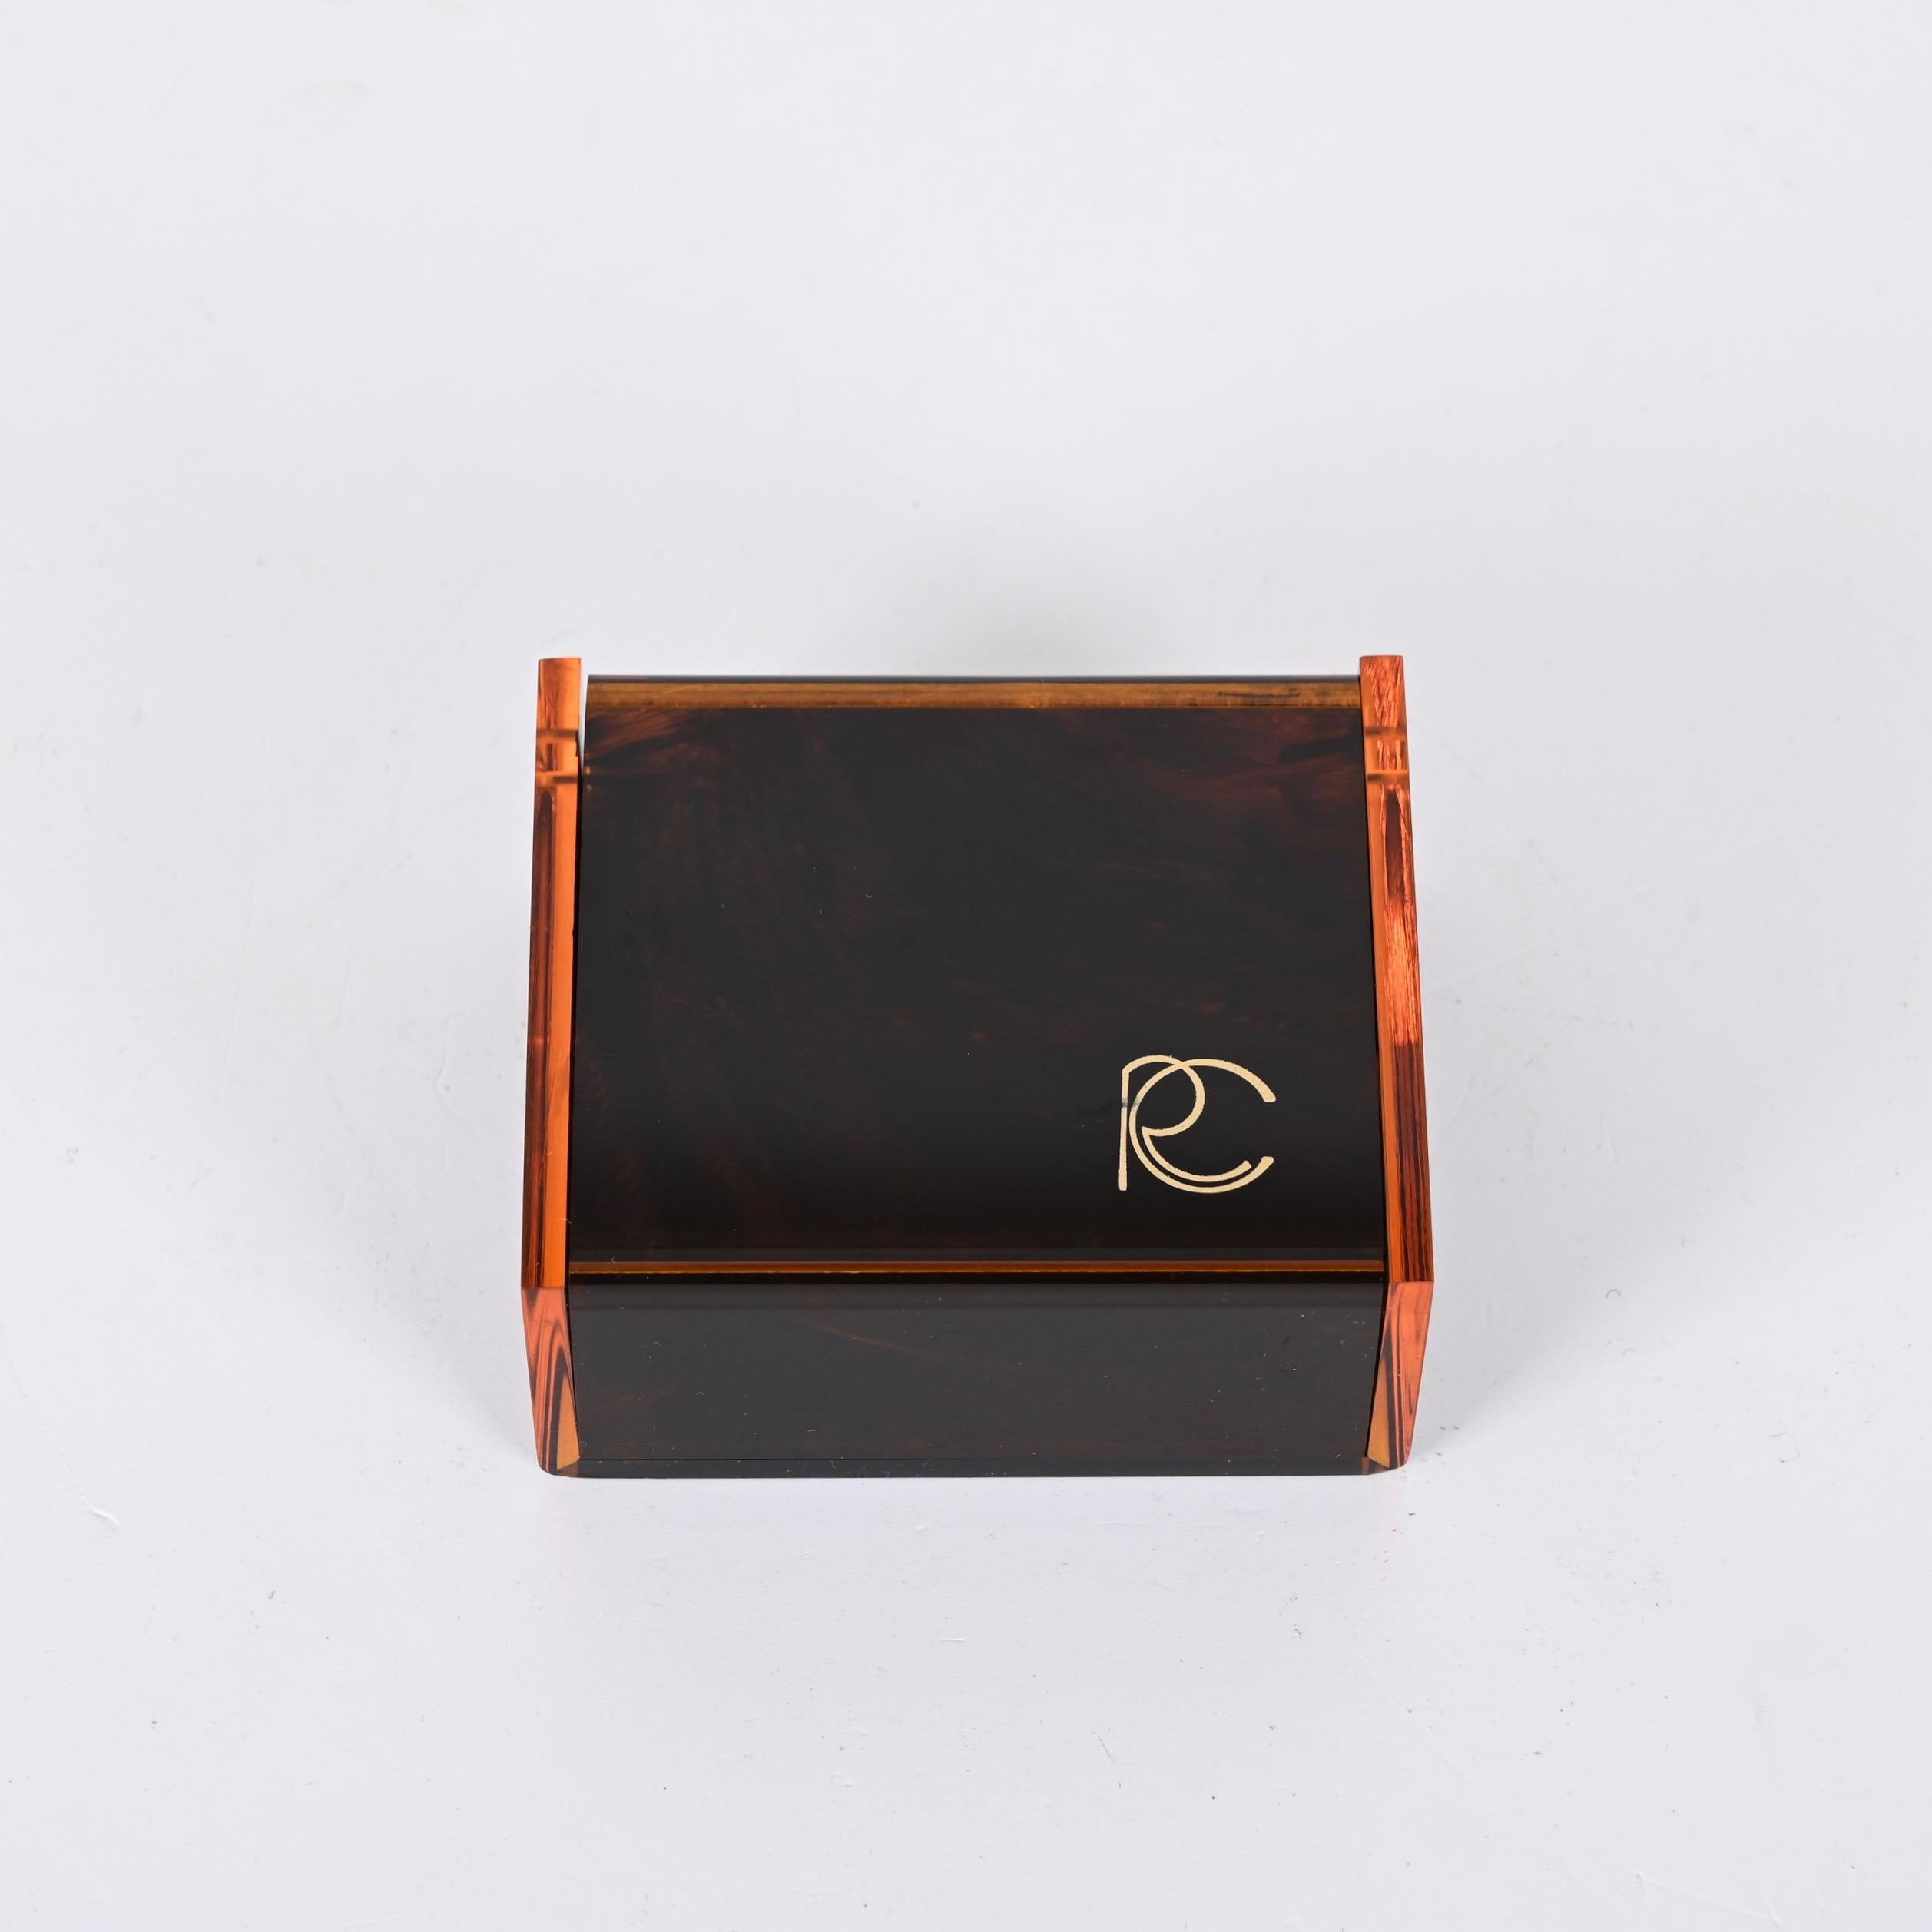 Roberto Cavalli Lucite Jewelry Box with Tortoise Effect, Italy, 1970s For Sale 2